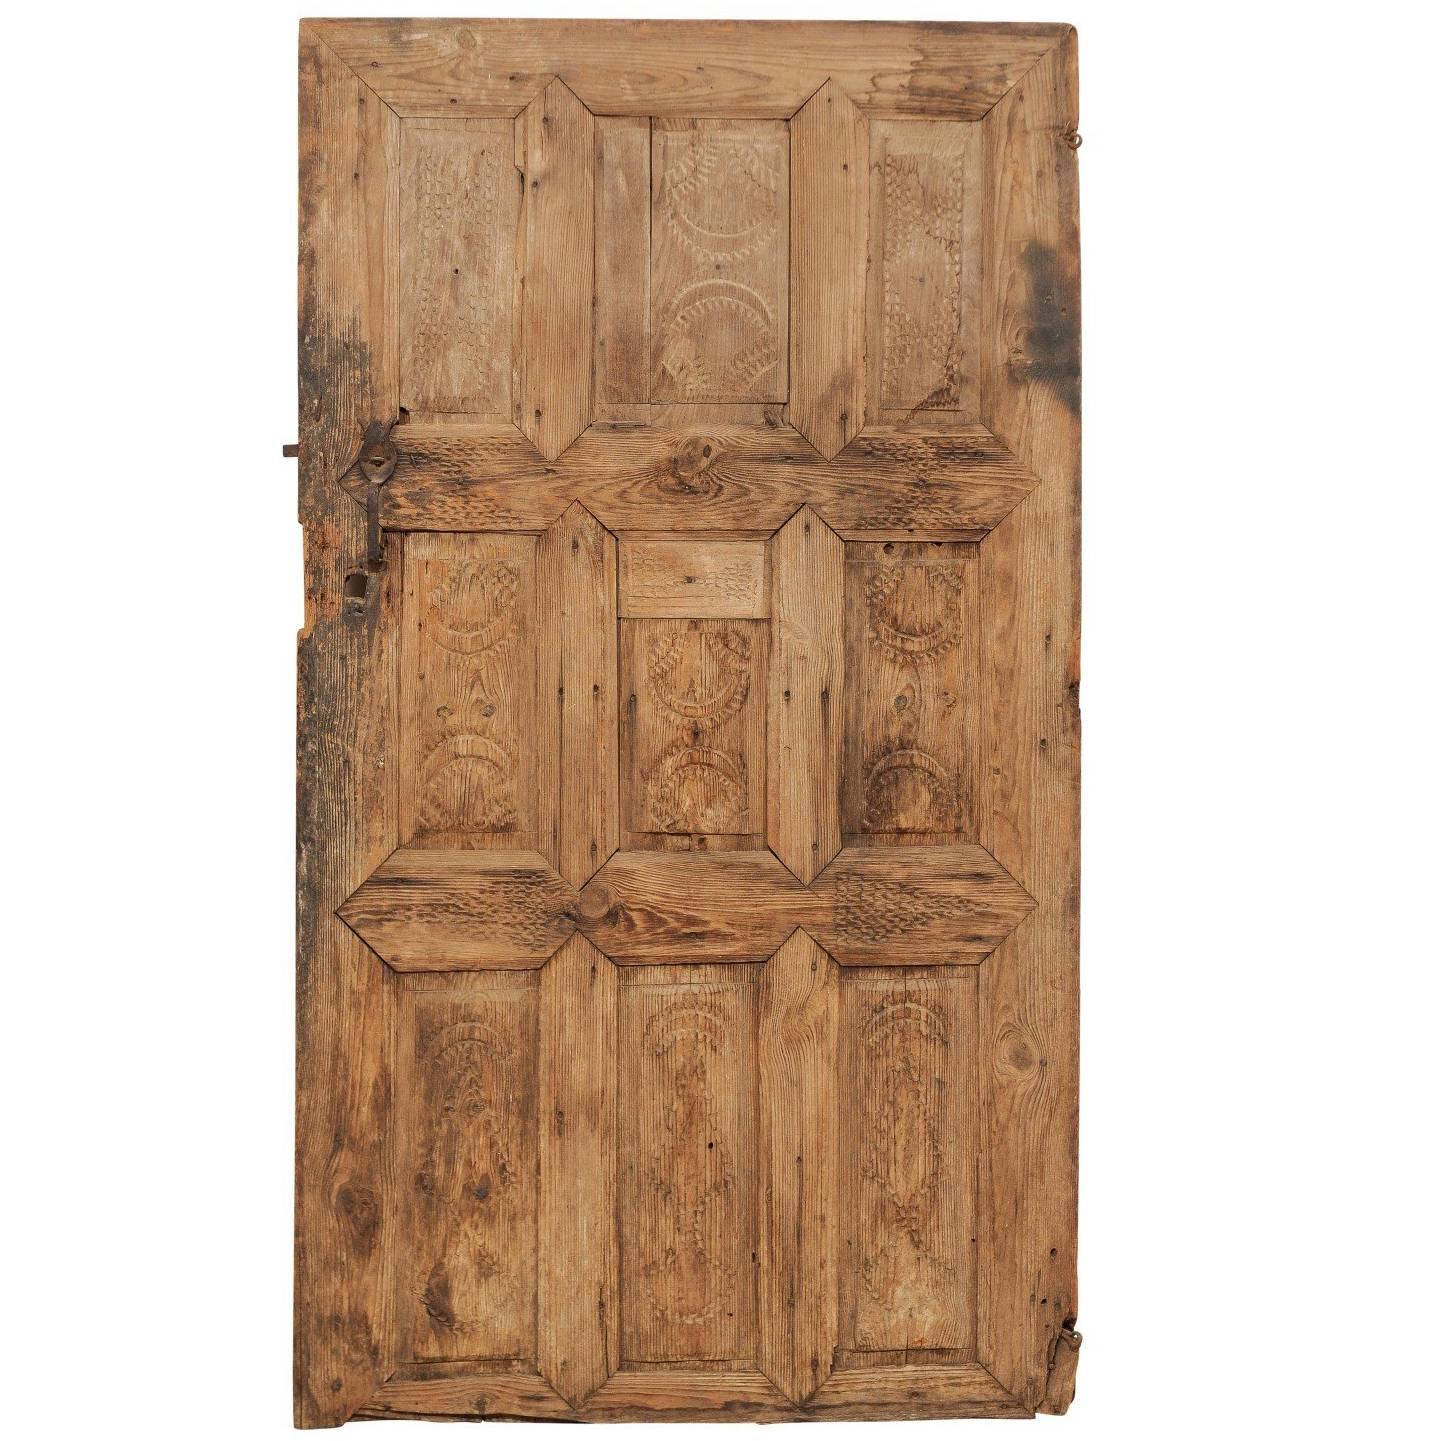 Single 19th Century European Rustic Wood Door with Delicate Carved Pattern